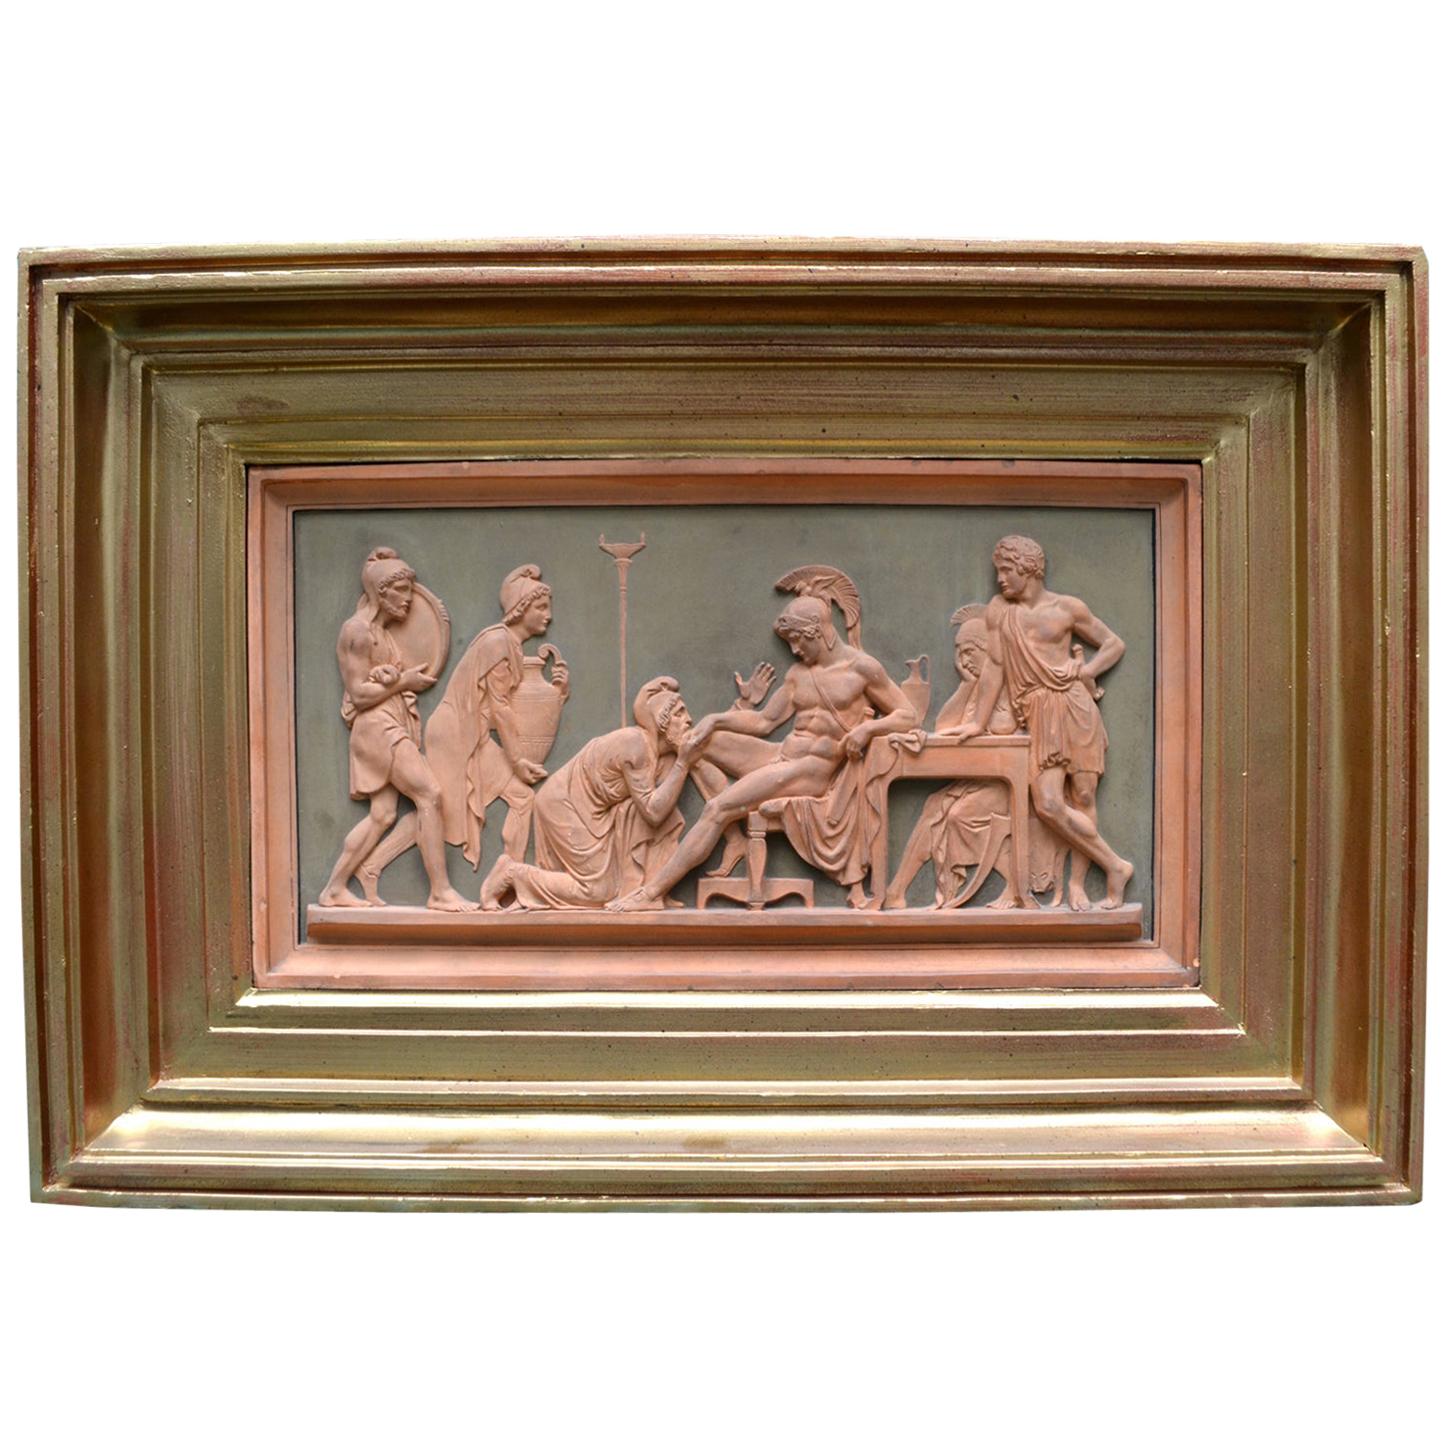 Early 20th Century Framed Neoclassical Terracotta Plaque after Thorlvladsen